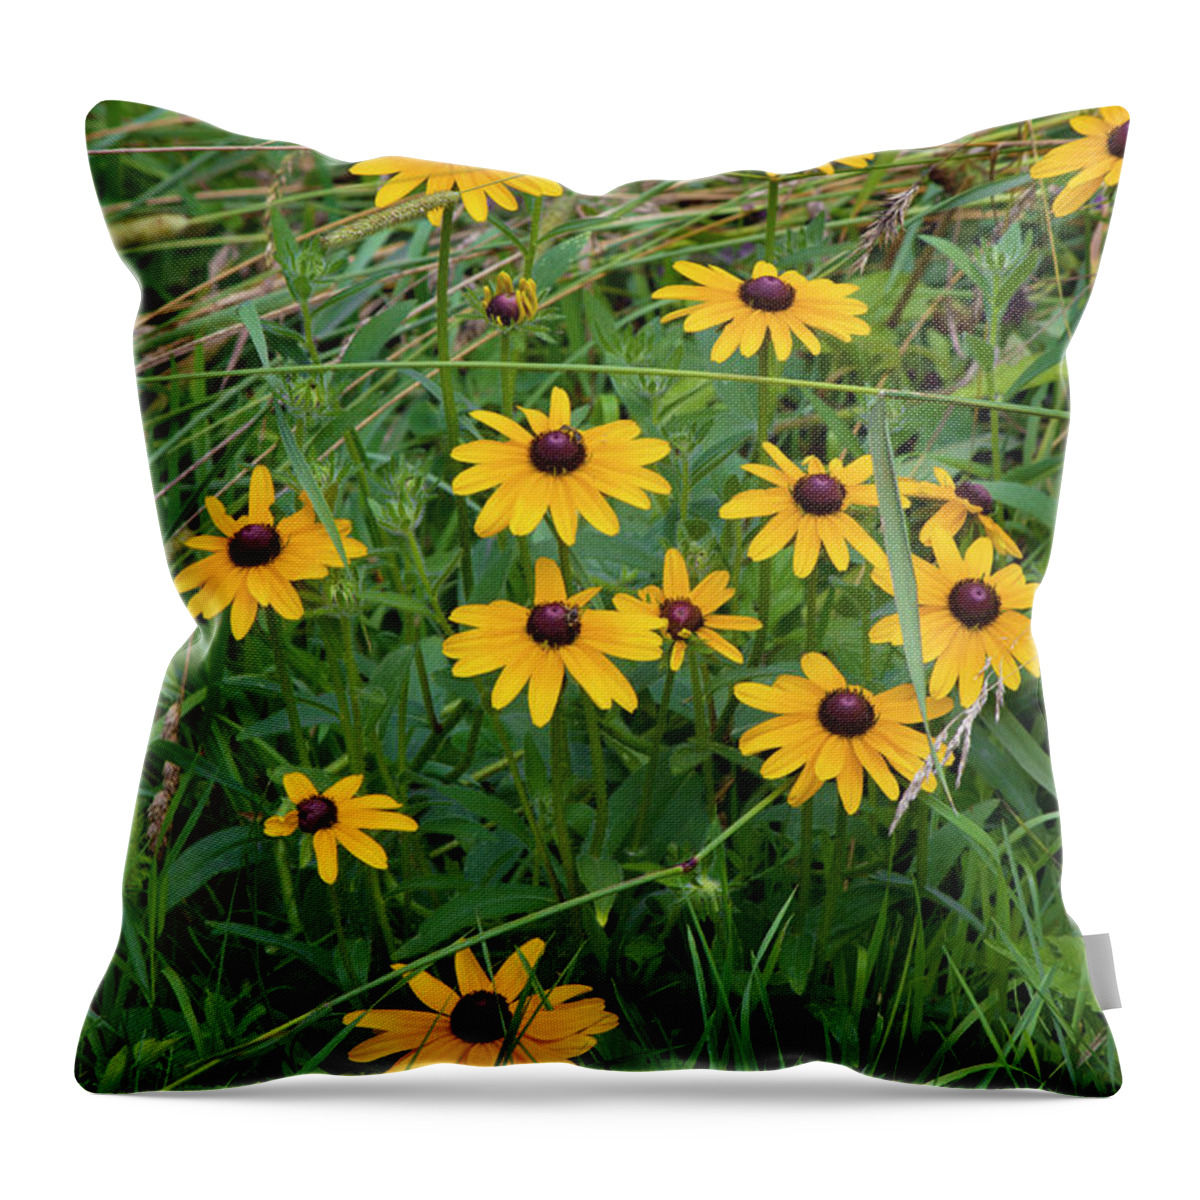 Allegheny Plateau Throw Pillow featuring the photograph Black-eyed Susan by Michael Gadomski